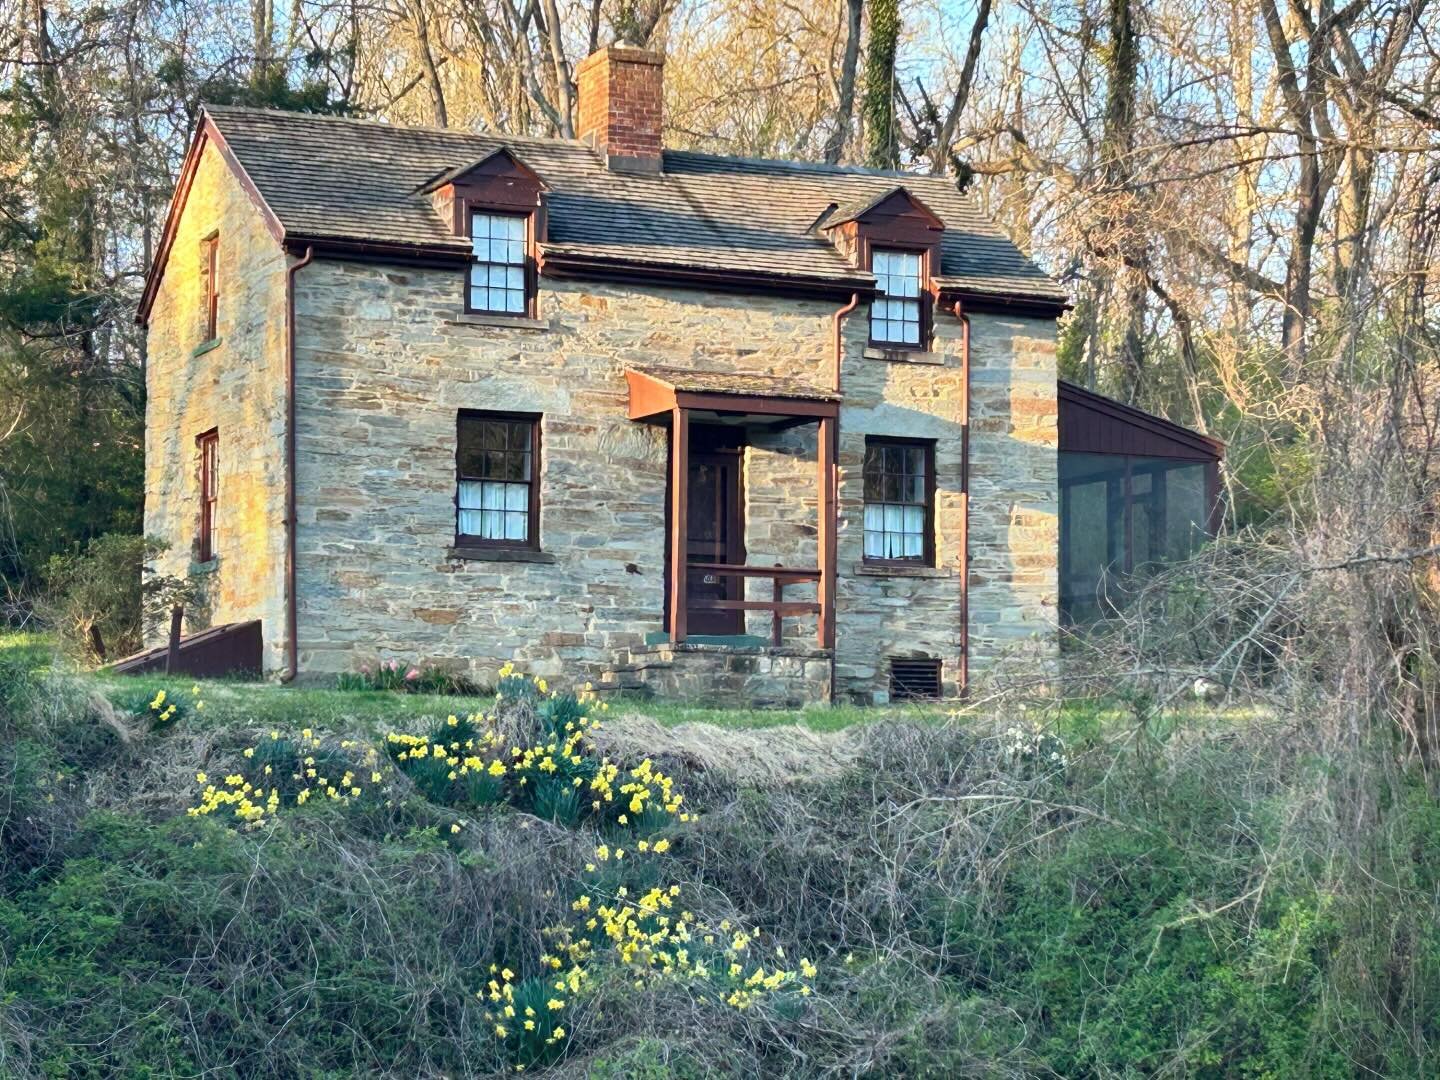 Home for the night. 

The @canaltrust maintains historic lock houses along the @ChesapeakeandOhioCanal that can be rented. Some are just outside the nation&rsquo;s capital, for when a weary Washingtonian wants an evening in the woods along the Potoma